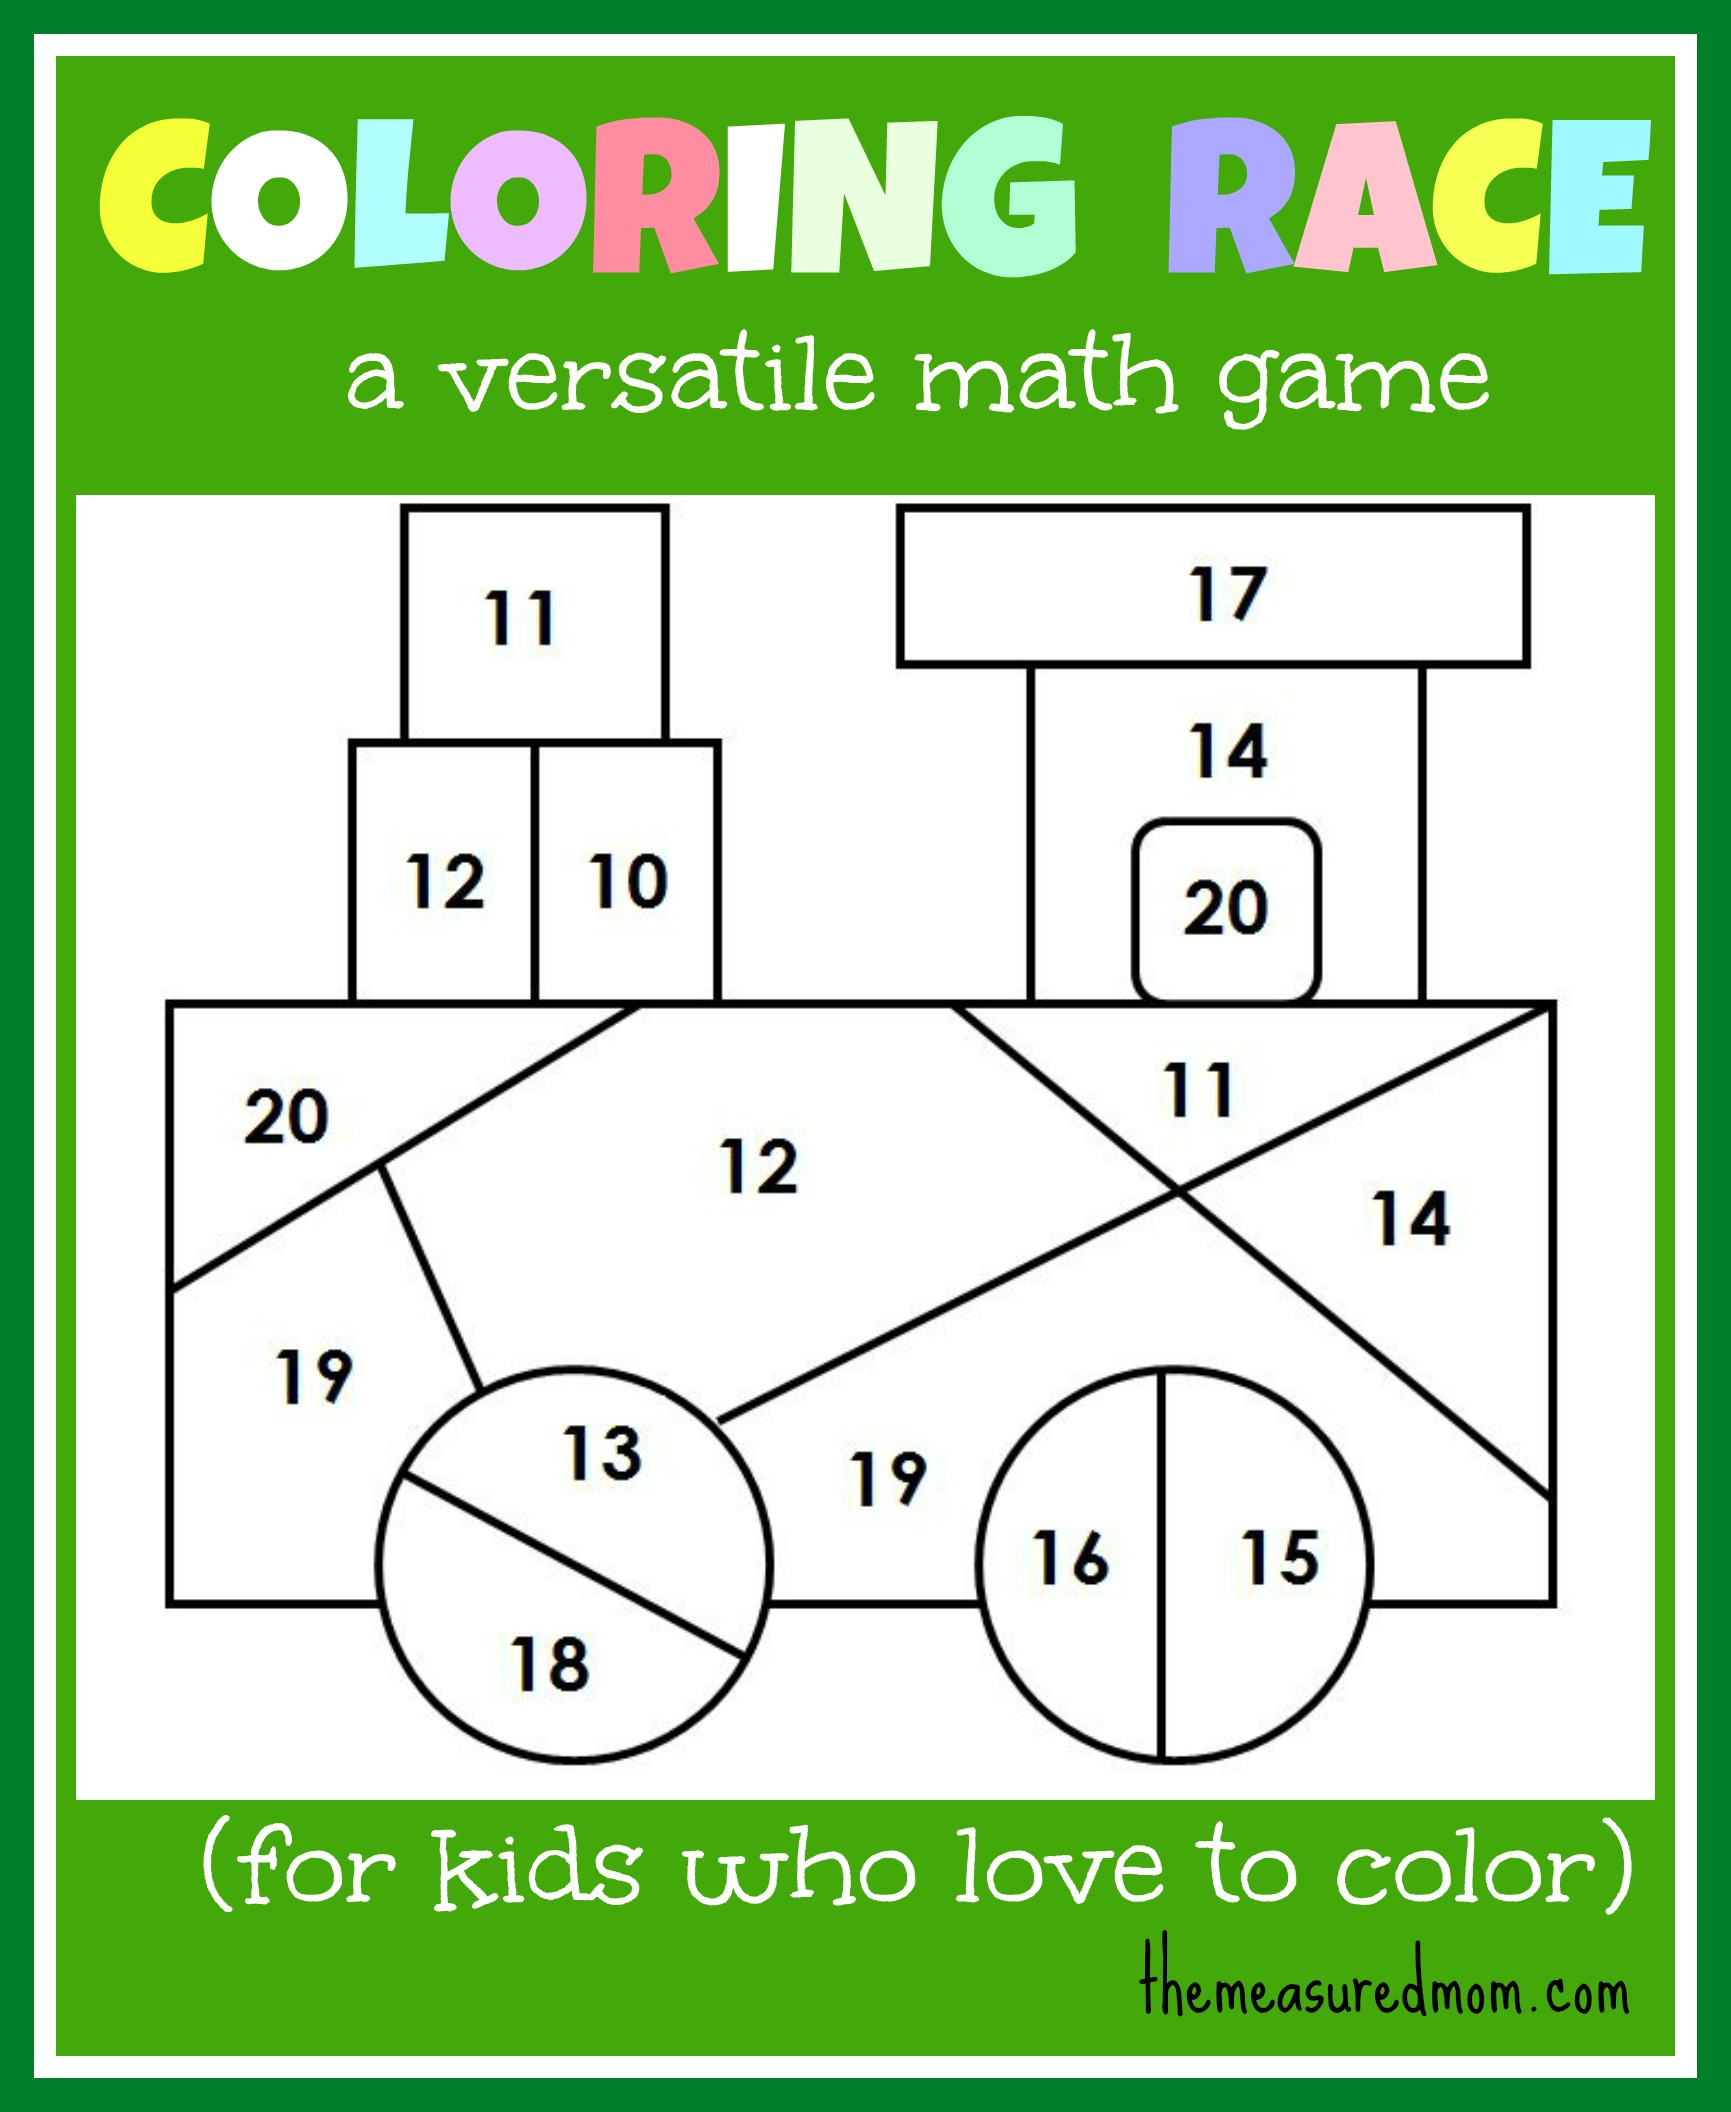 Online Coloring Pages For Kids Games
 Math game for kids Coloring Race bines math and